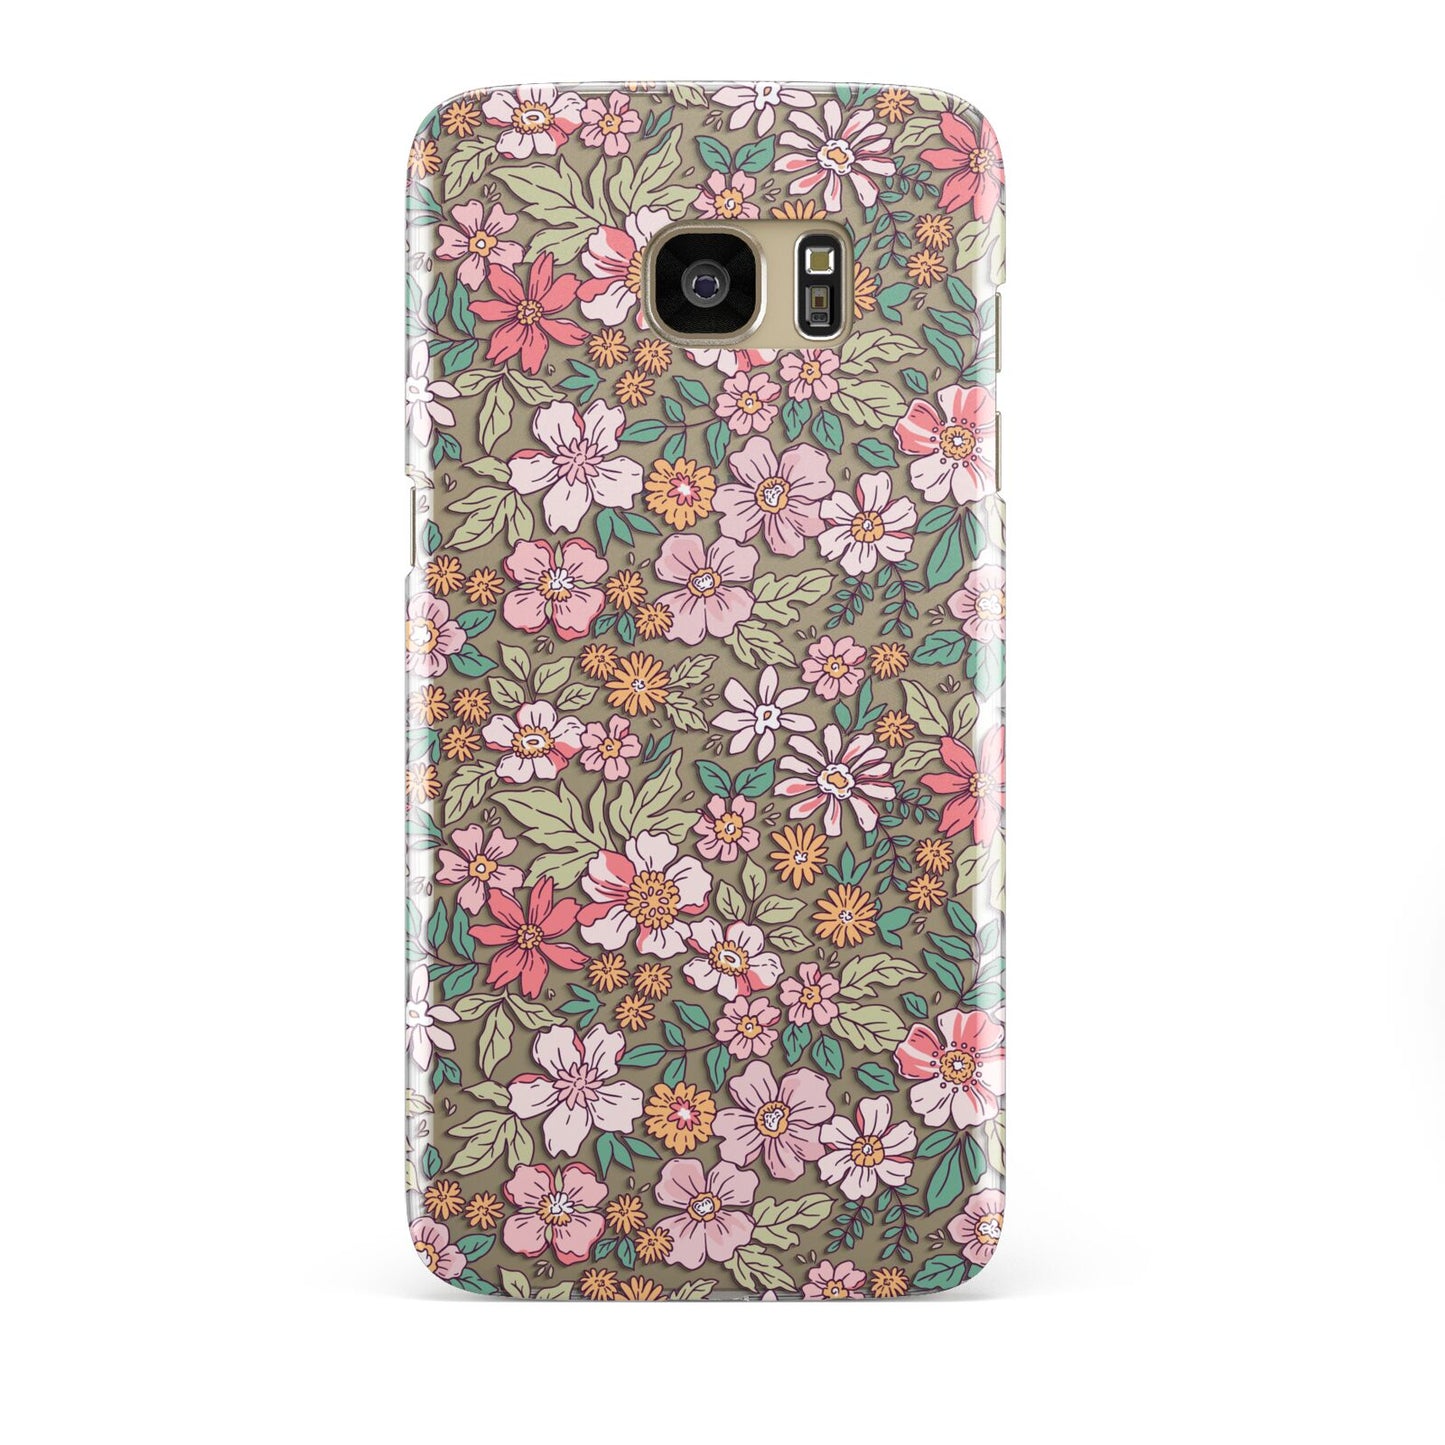 Small Floral Pattern Samsung Galaxy S7 Edge Case